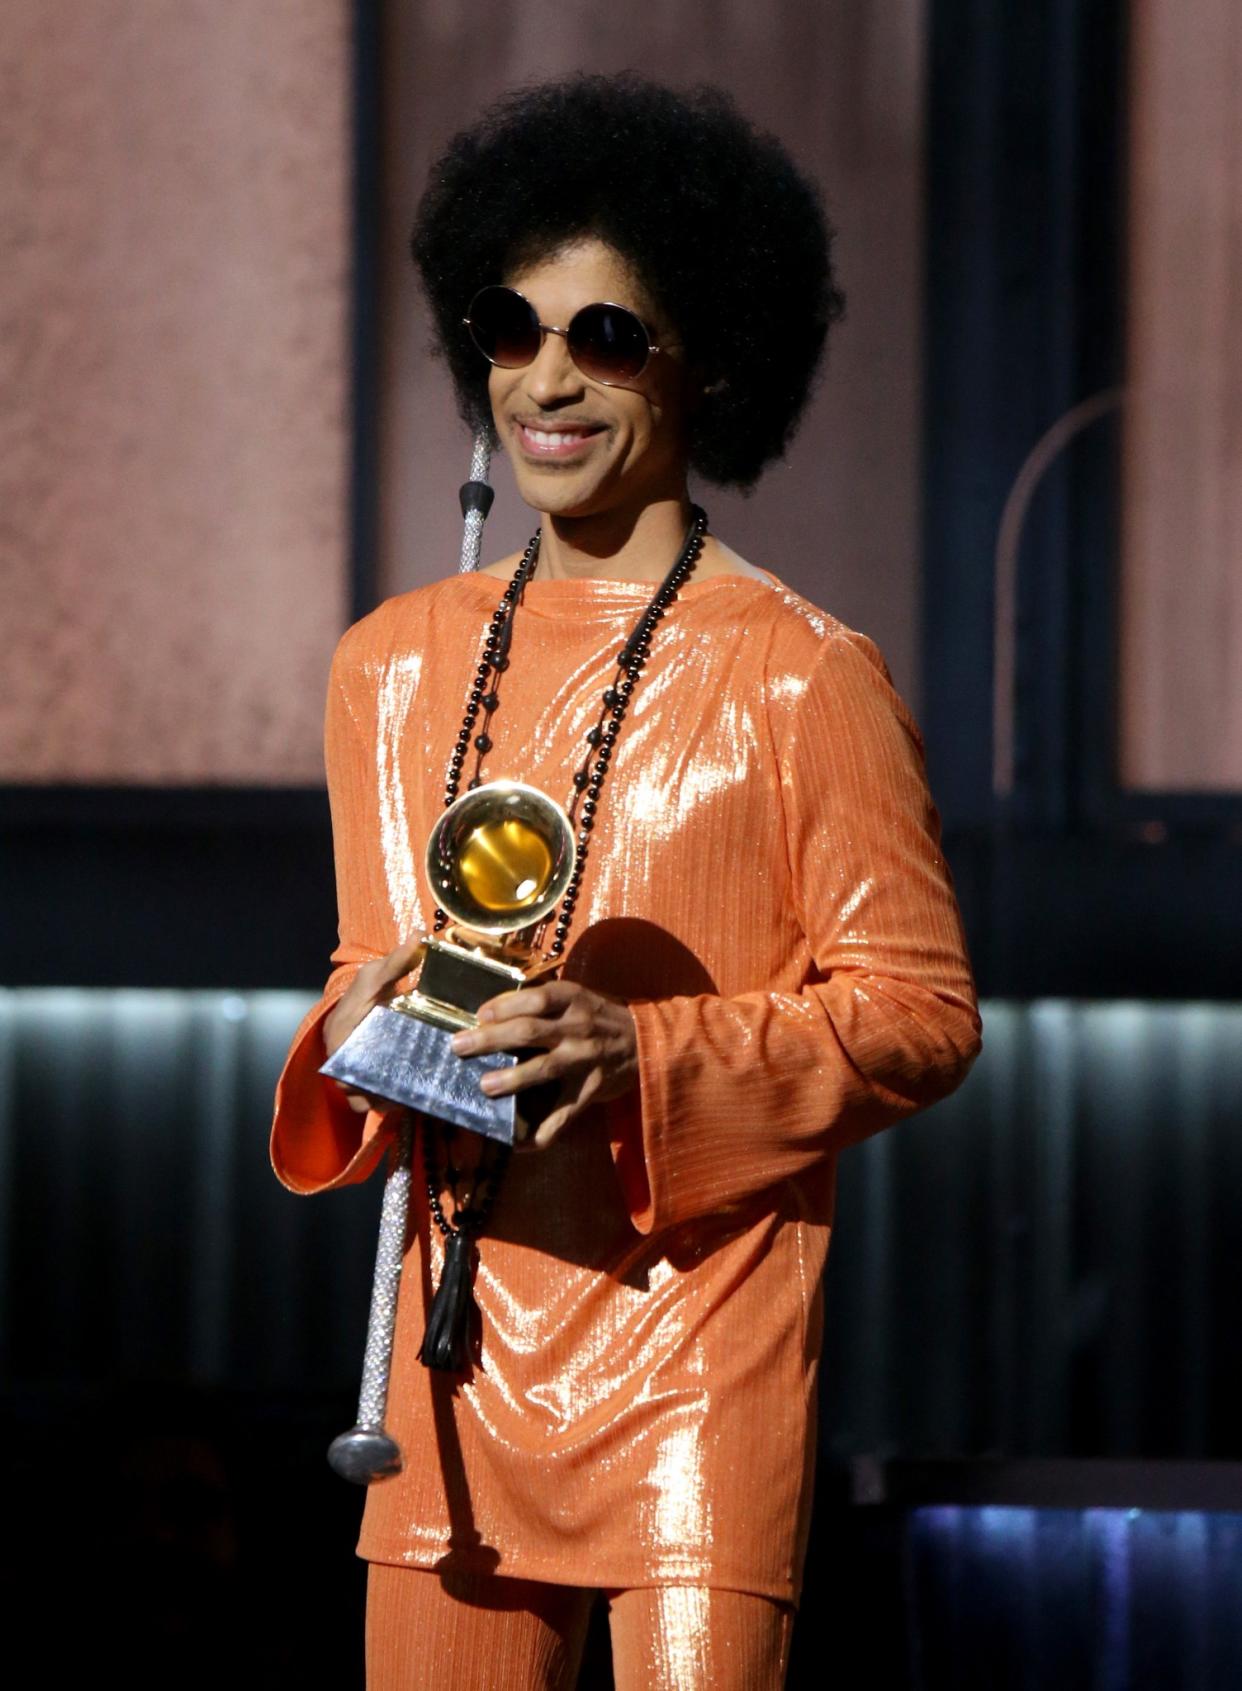 Prince at the Grammys in 2015 (Photo: Michael Tran/FilmMagic)